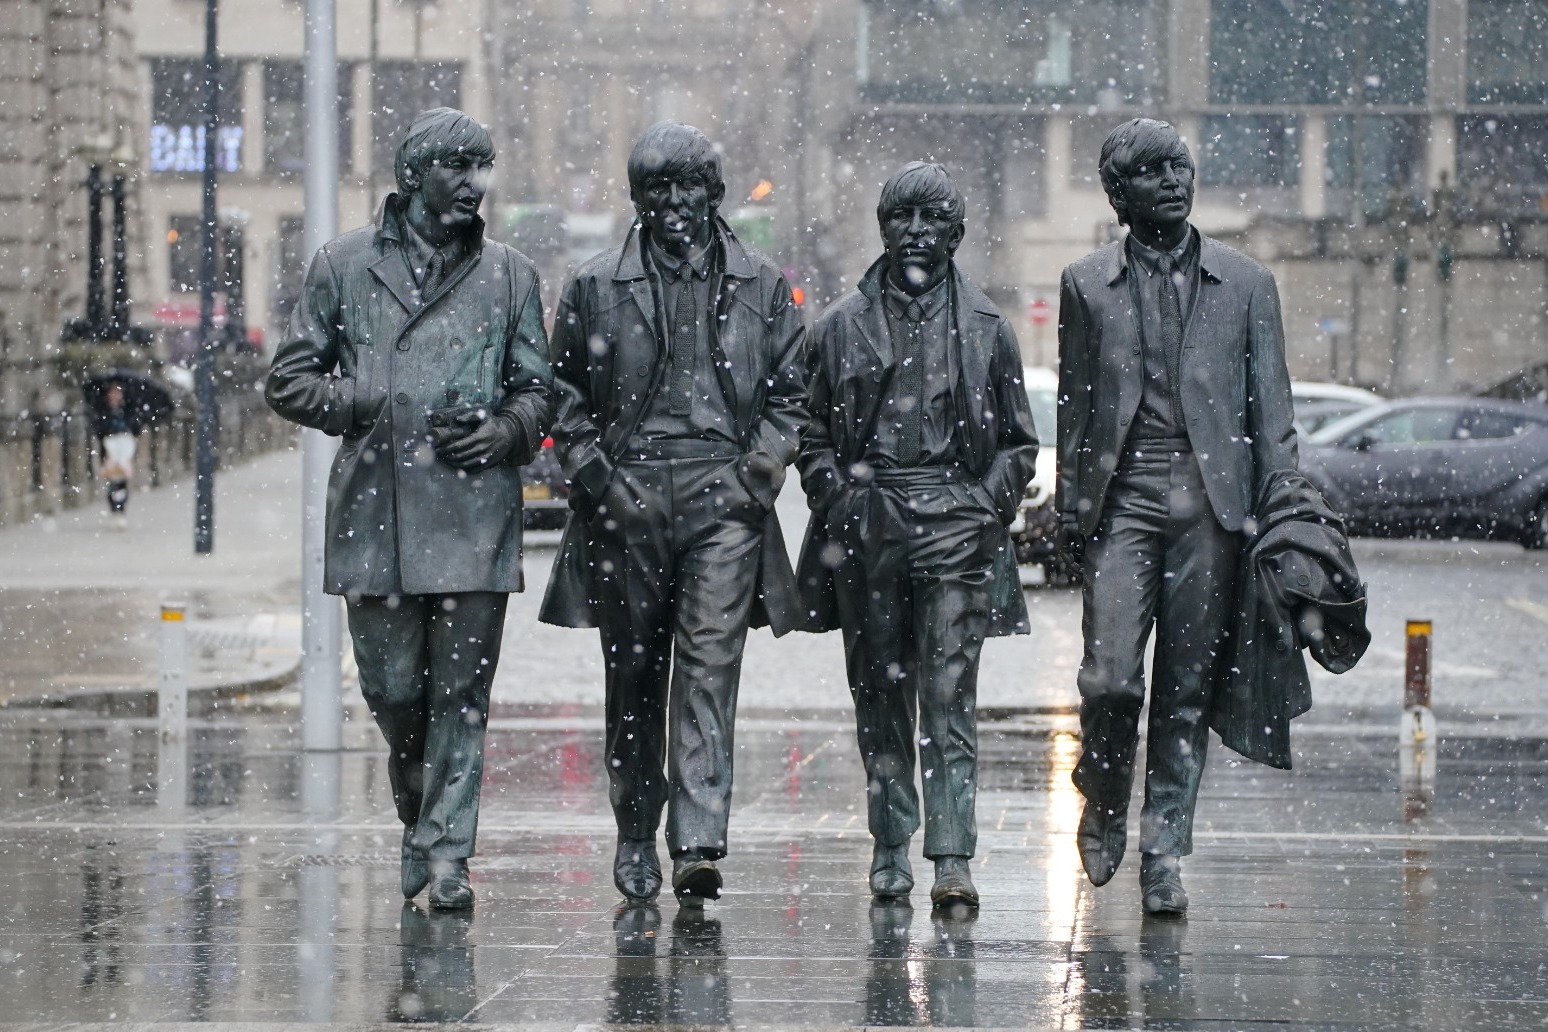 The Beatles Statue dressed in Ukrainian clothing ahead of Eurovision 